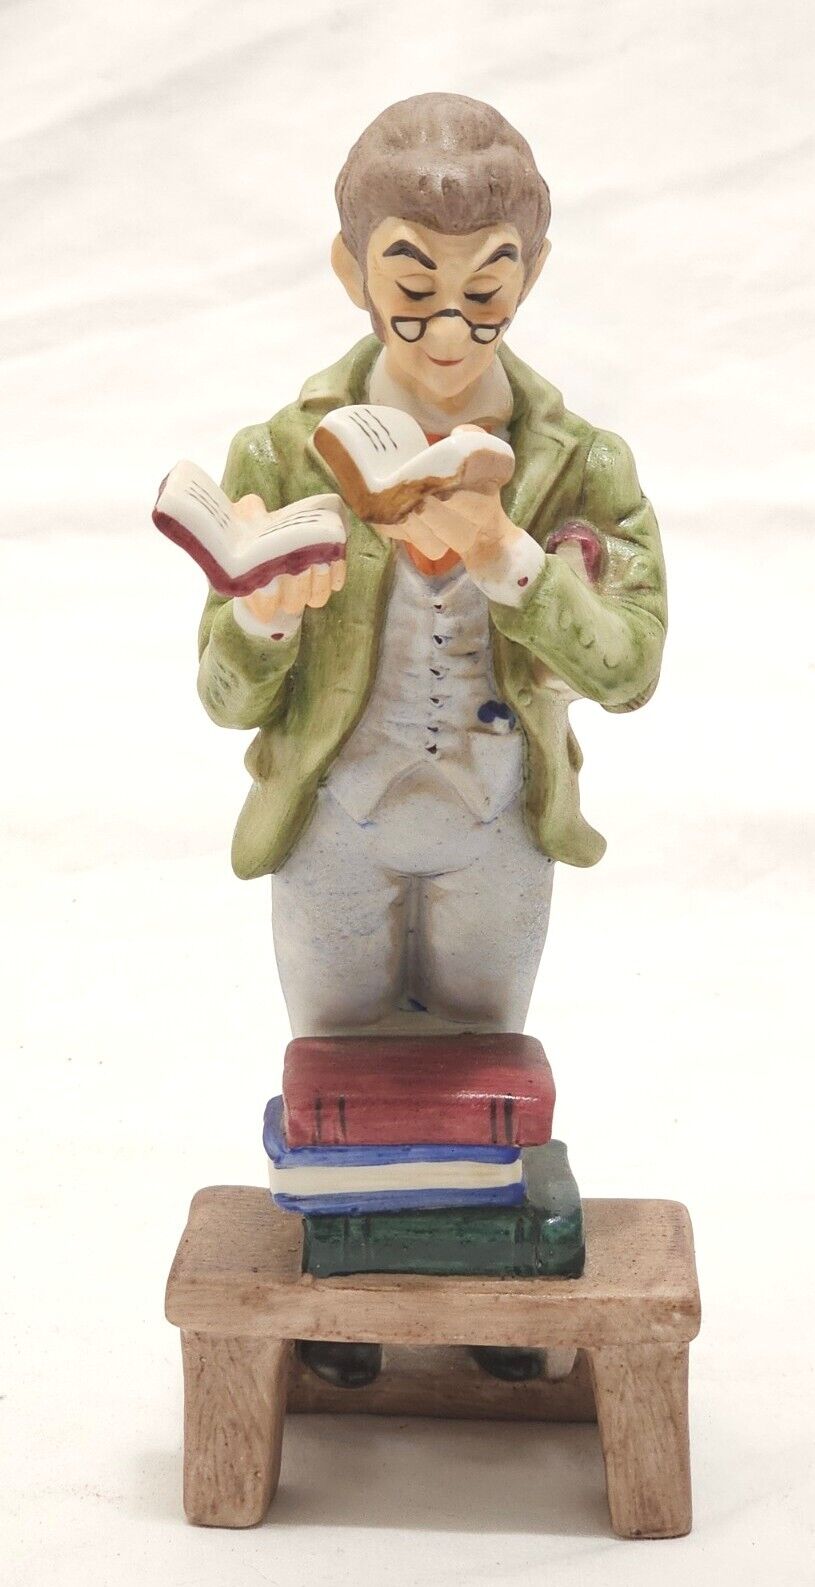 Lefton China Vintage Hand Painted Figurine ~ The Librarian ~ 8.25